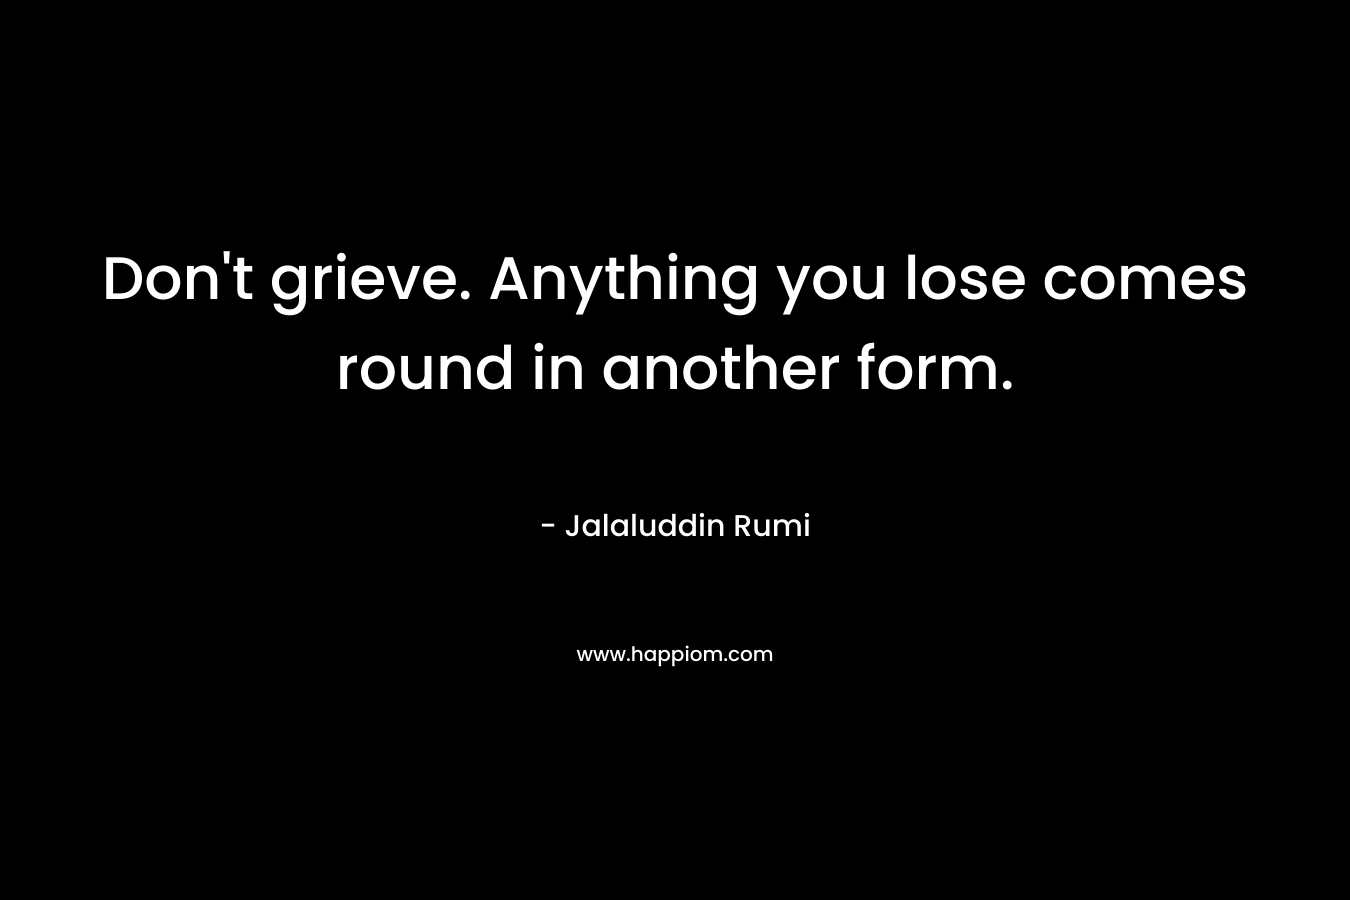 Don't grieve. Anything you lose comes round in another form.